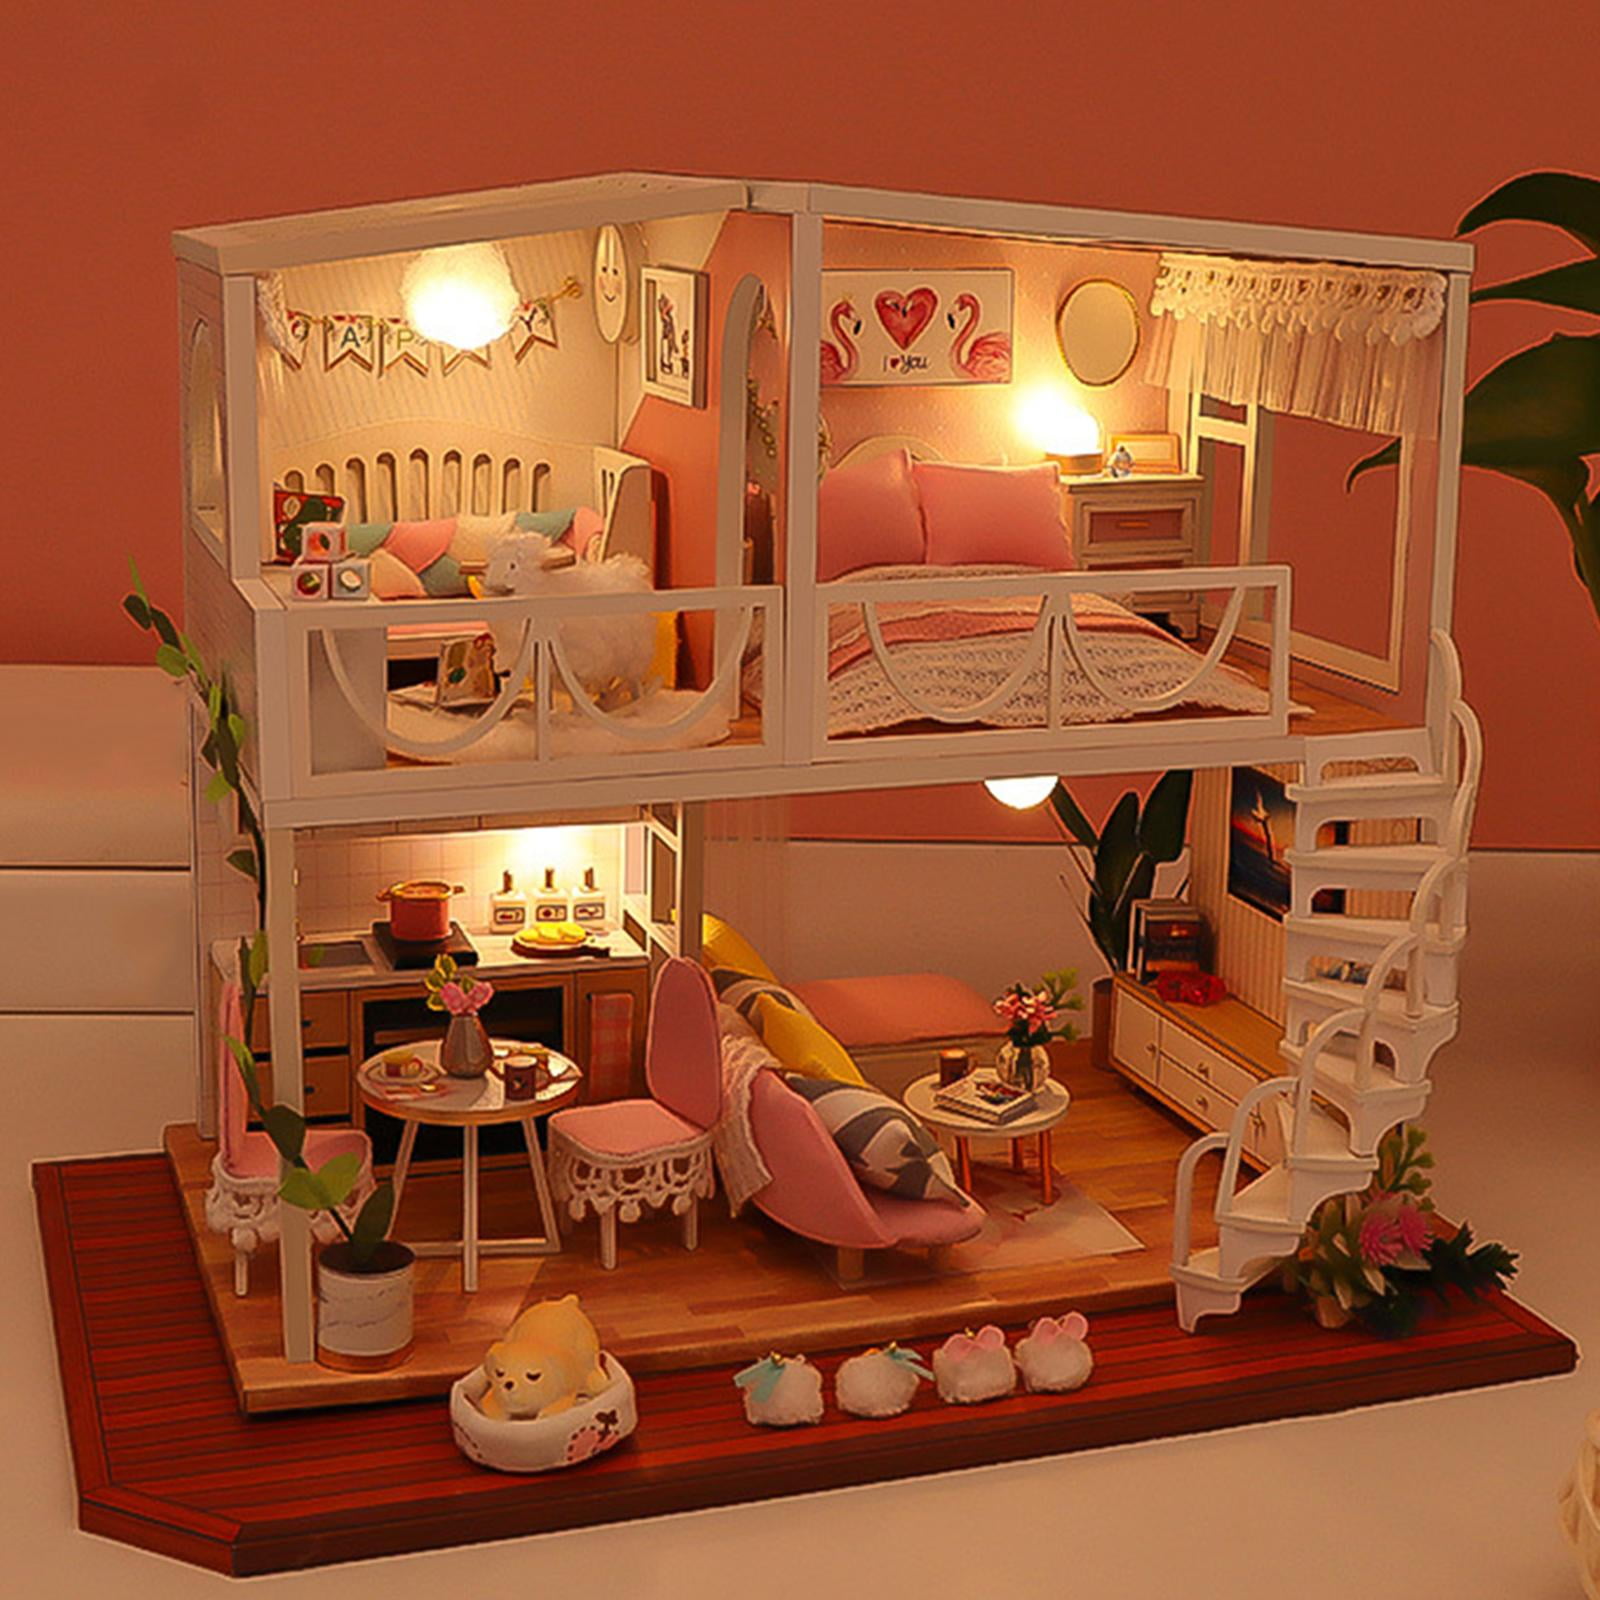  CUTEROOM DIY Doll House Miniature Furniture Wooden House Kit  with Dust Cover & LED Light and Accessories - New Three Styles QT Series  Dollhouse (QT048) : Toys & Games